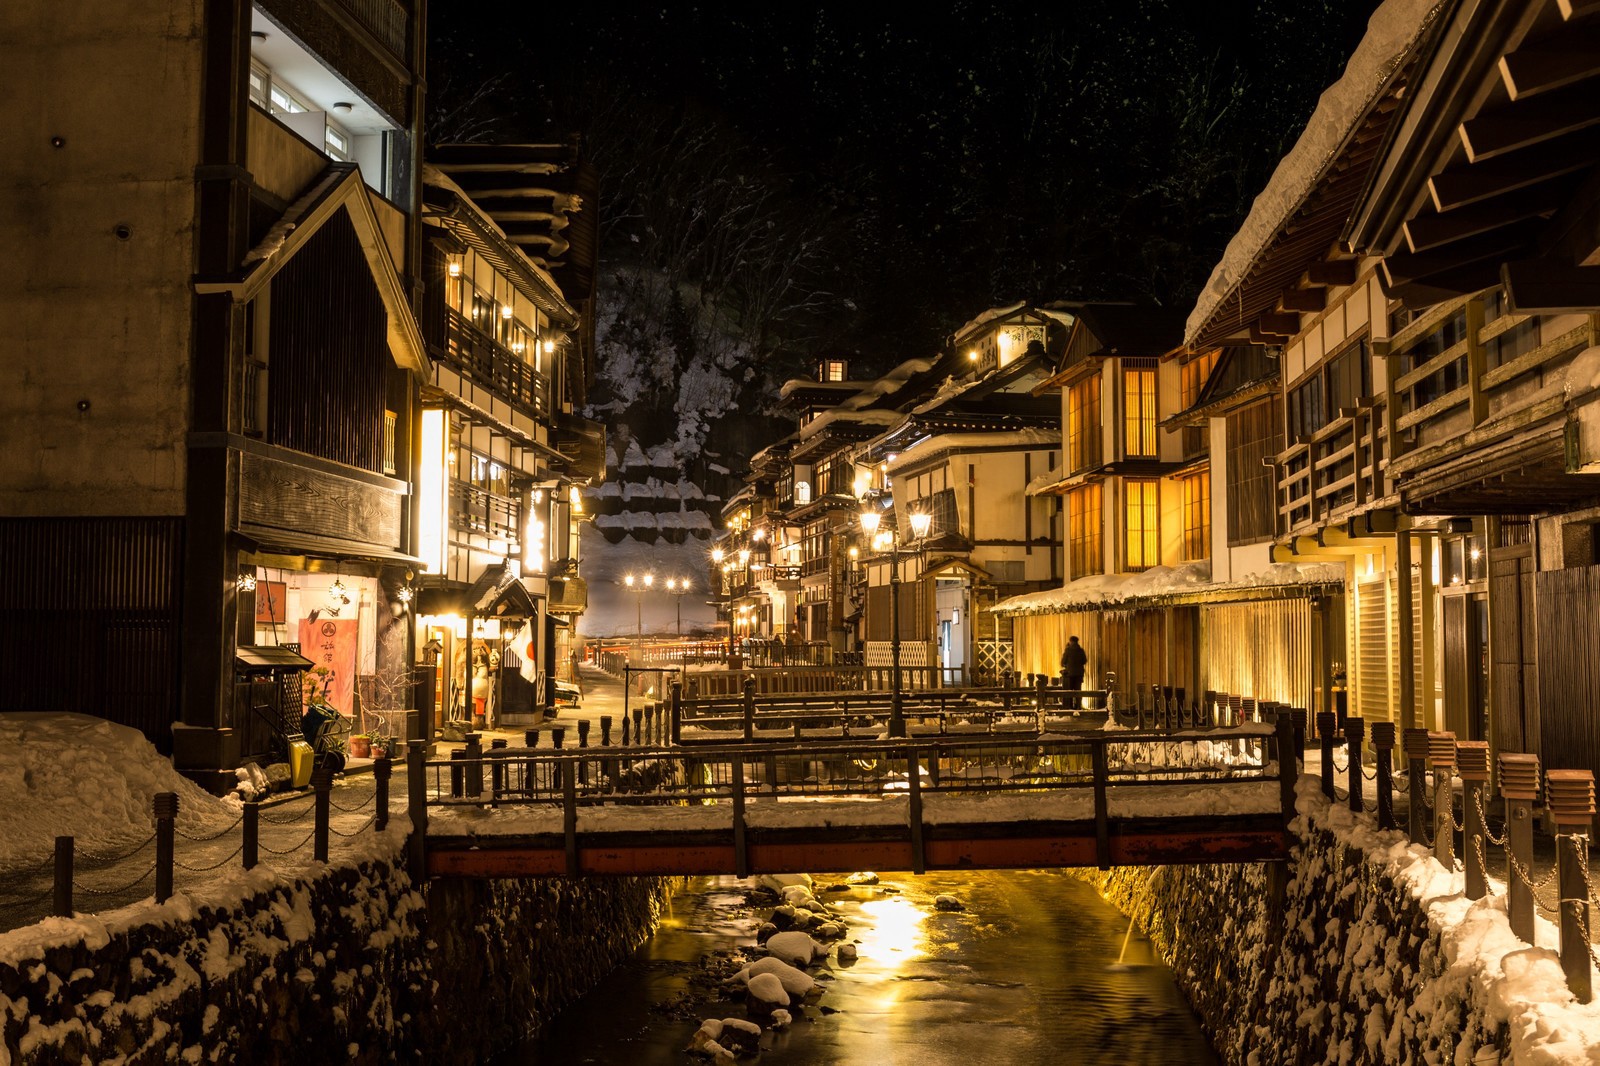 Ginzan Onsen: one of the most scenic Onsen towns in Japan